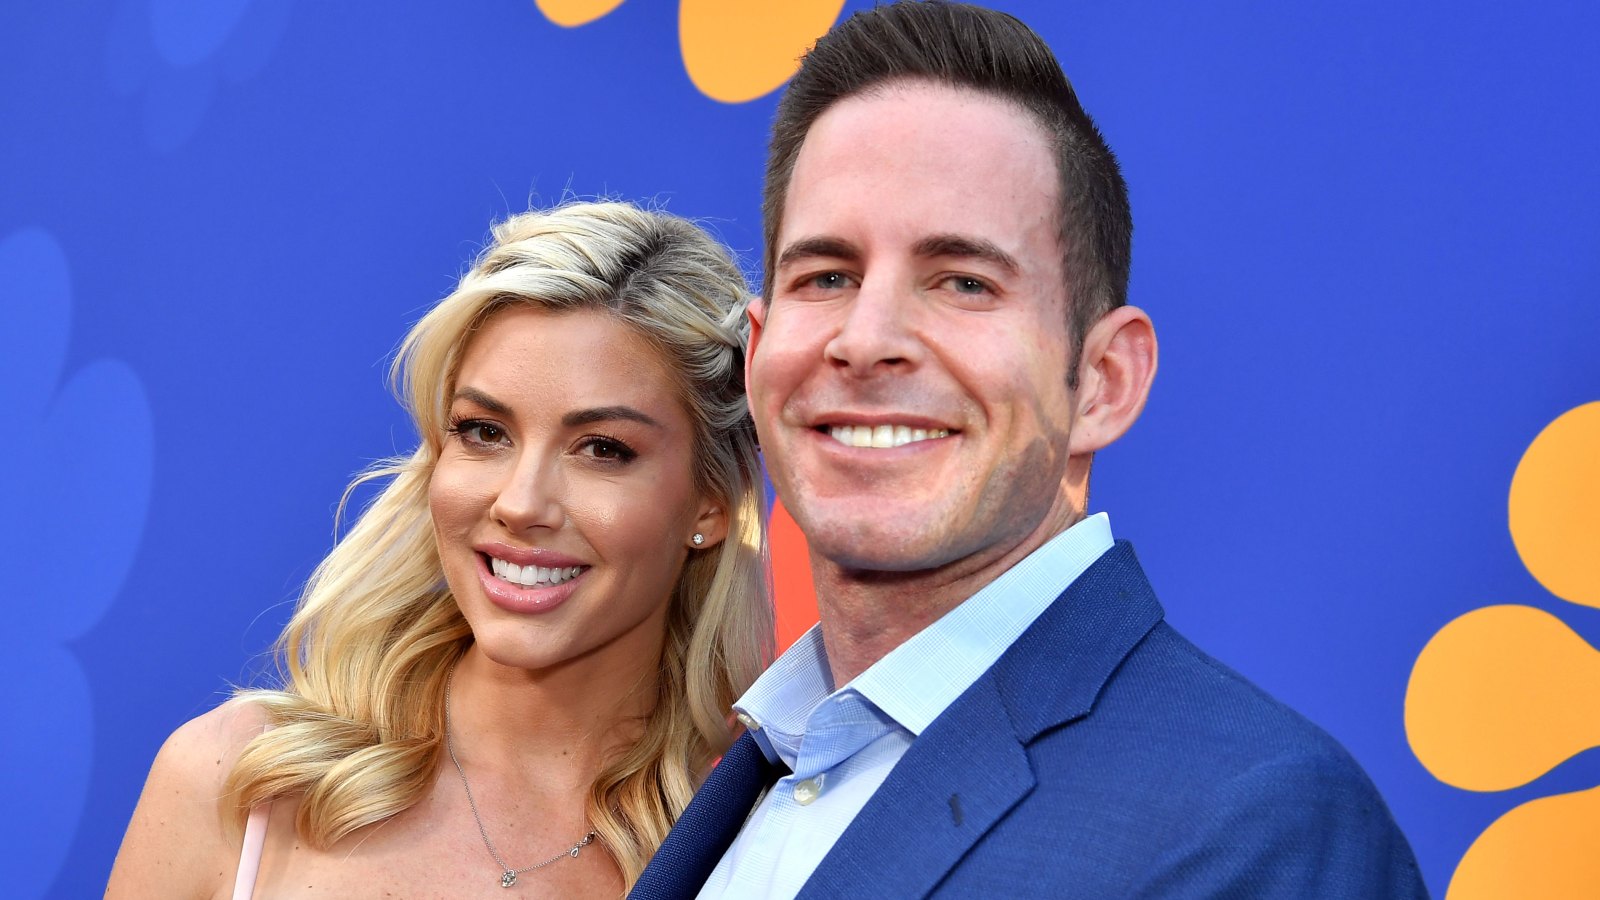 Tarek El Moussa and Girlfriend Heather Rae Young Have 'Definitely' Talked About Getting Engaged